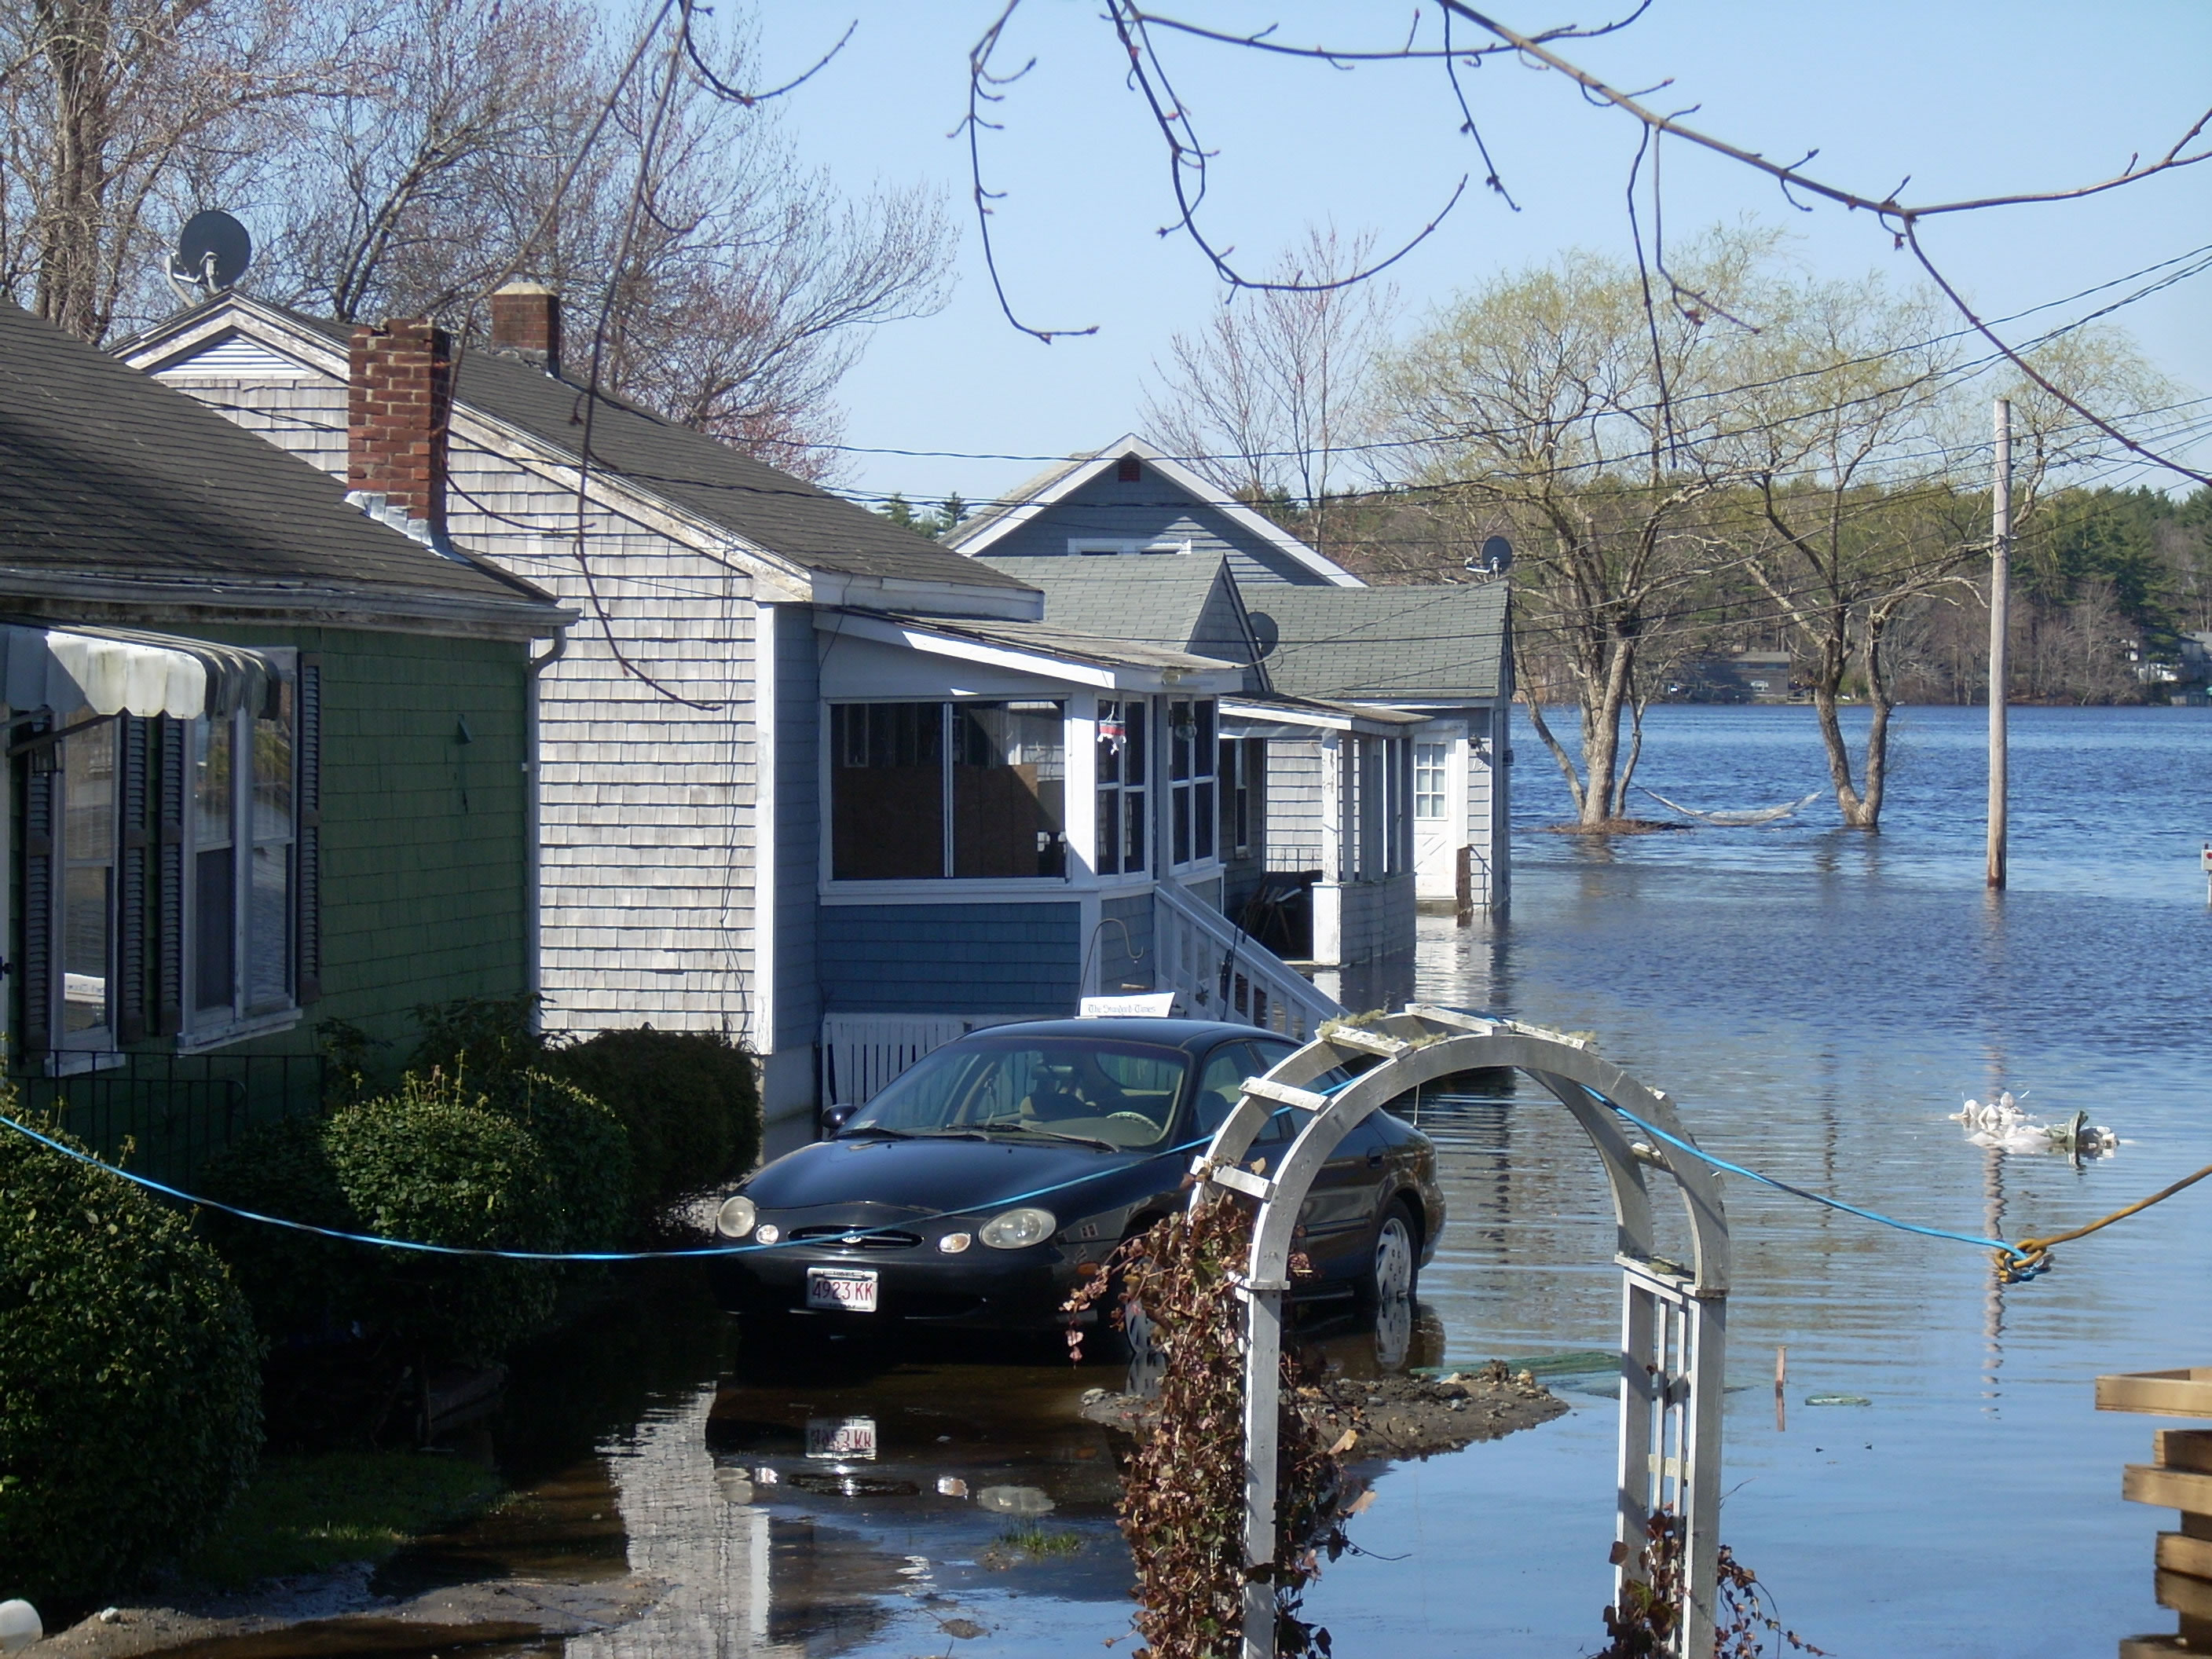 A photo of the flood in Lakeville in March in 2010 taken April 3rd